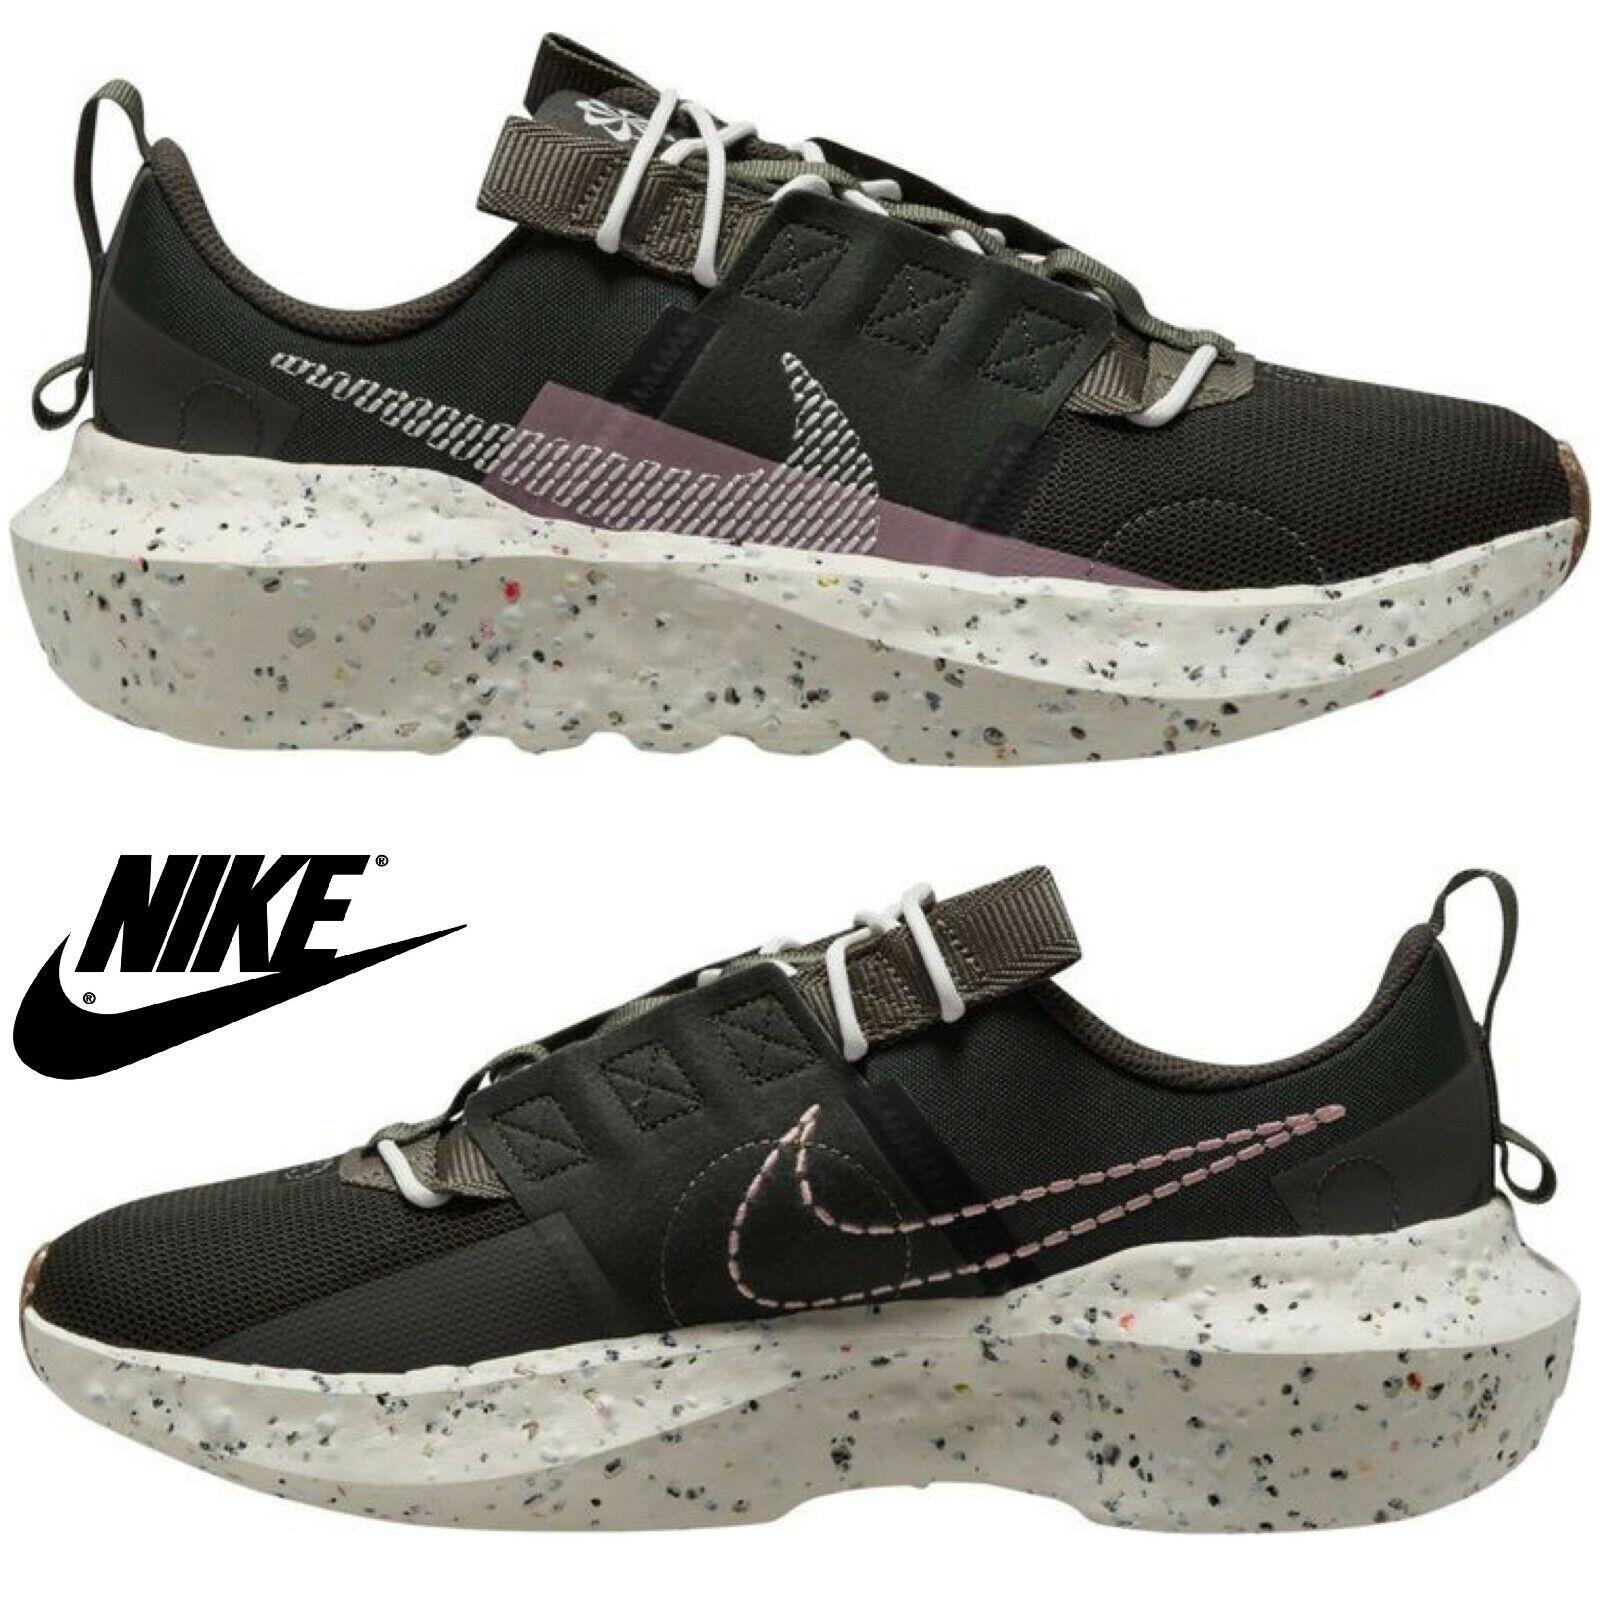 Nike Crater Impact Men`s Sneakers Training Athletic Comfort Sport Casual Shoes